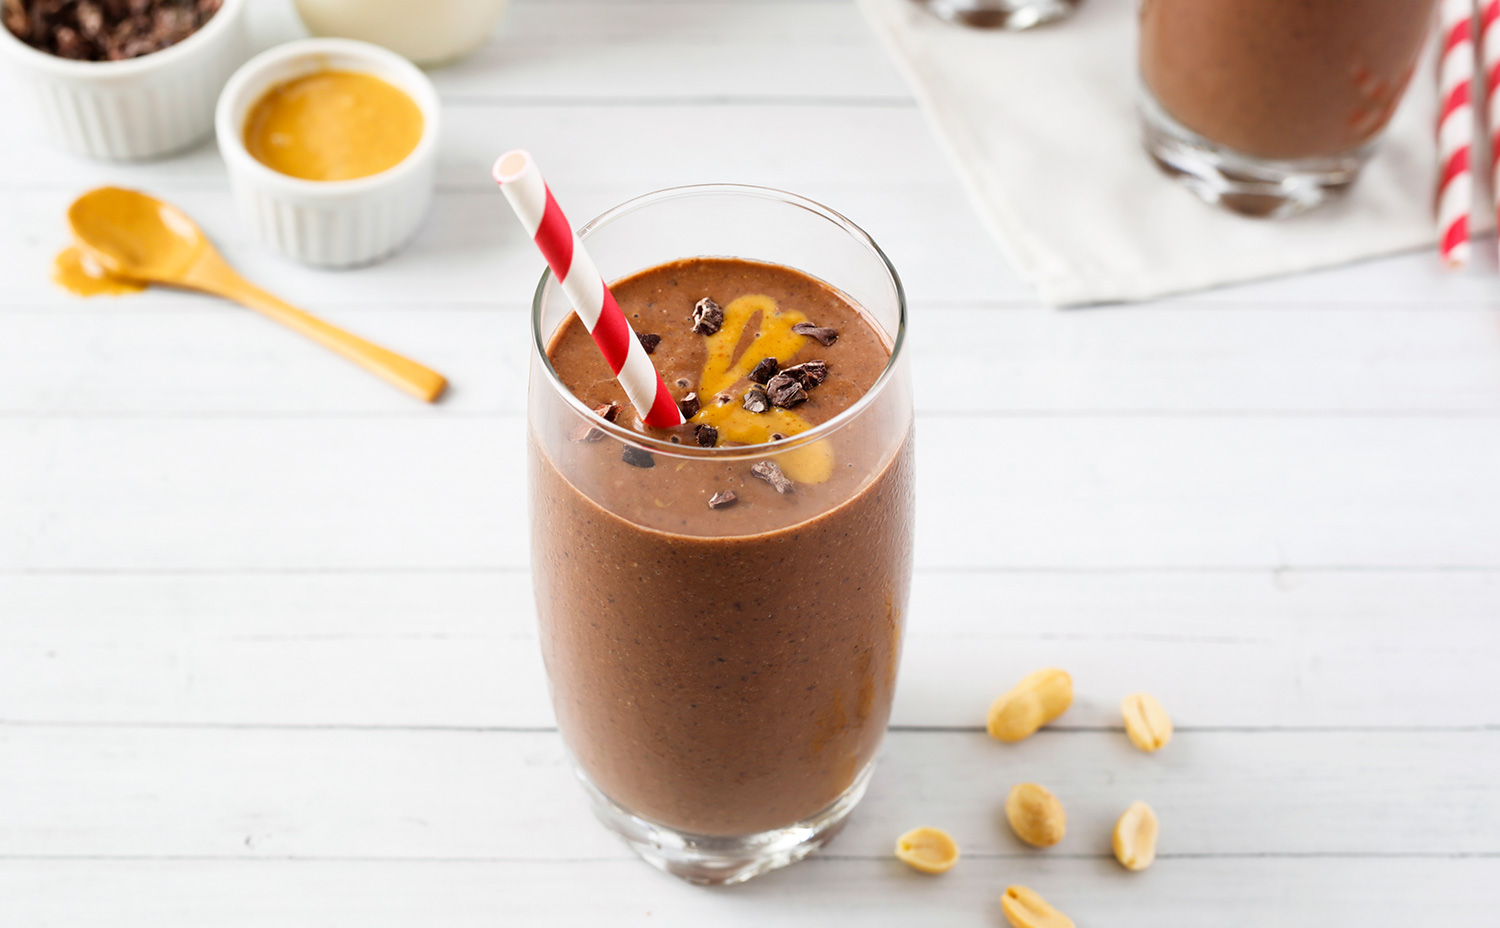 Chocolate Peanut Butter Cup Smoothie